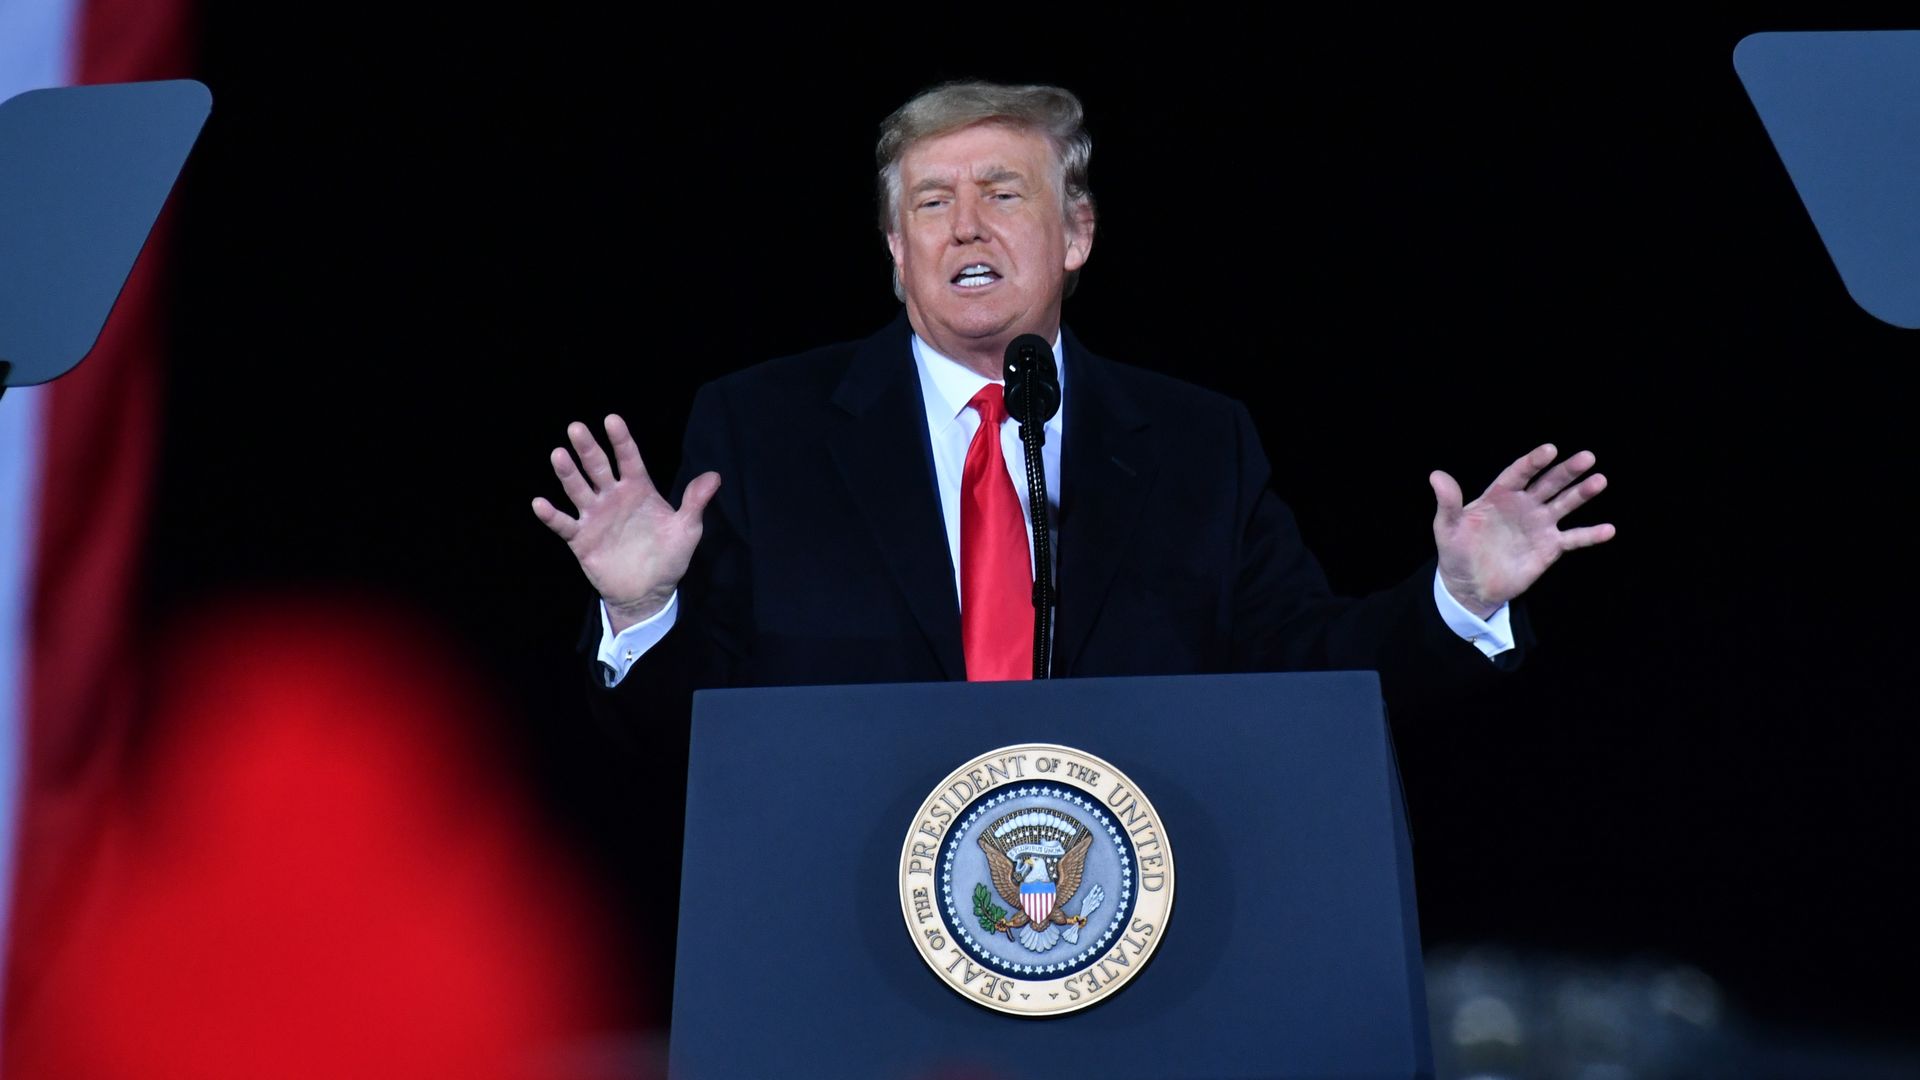 President Donald J. Trump speaks during the Victory Rally by the Republican National Committee in Dalton, Georgia, United States on January 04